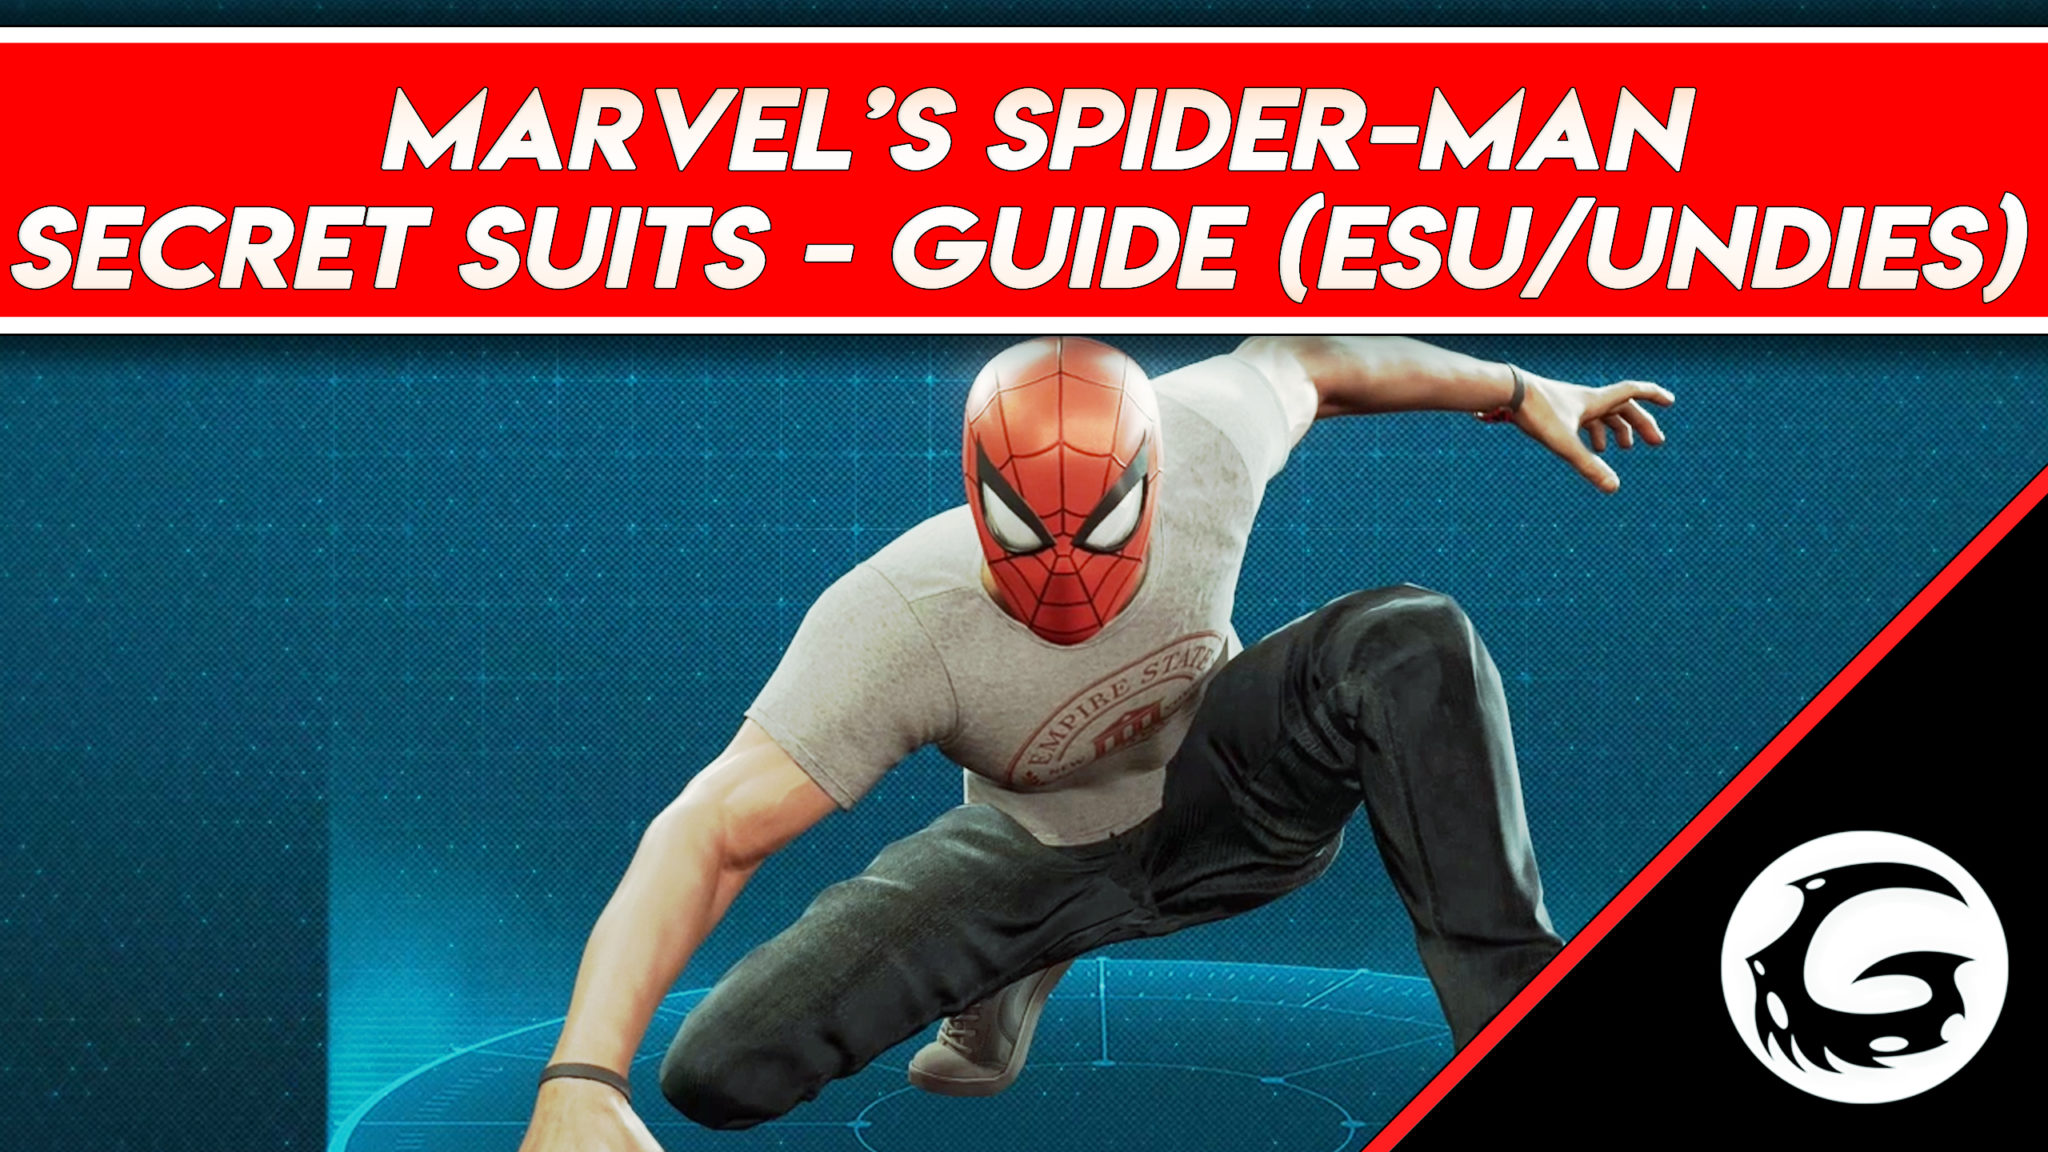 Spider-Man Trophy Guide: With Great Power and Hug It Out